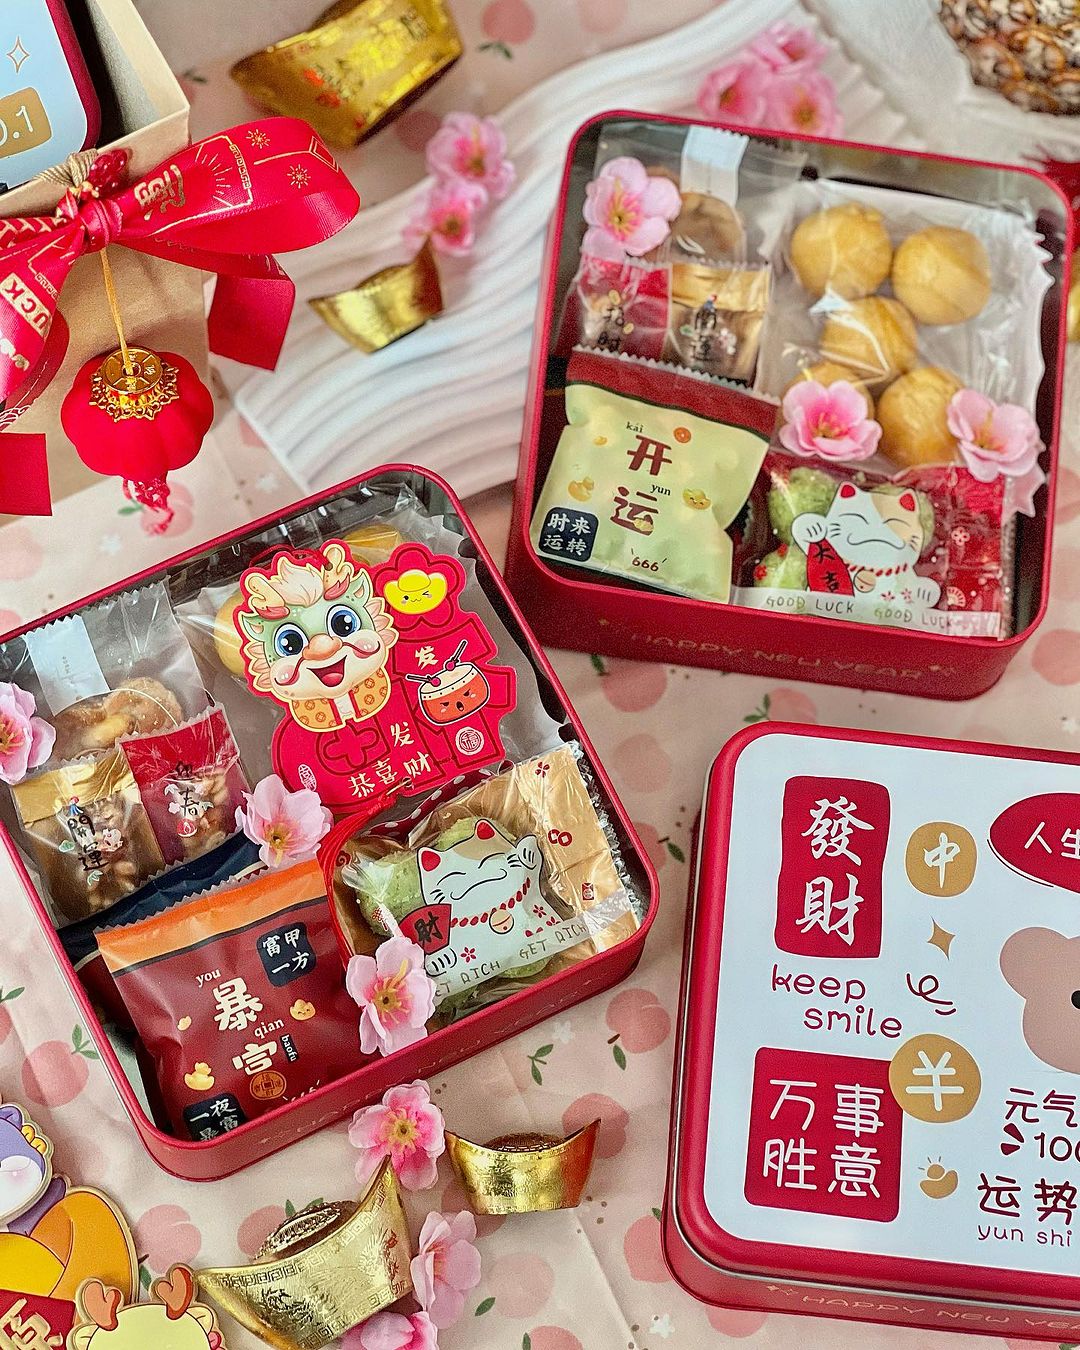 Aesthetic gift box - CNY gift sets and boxes